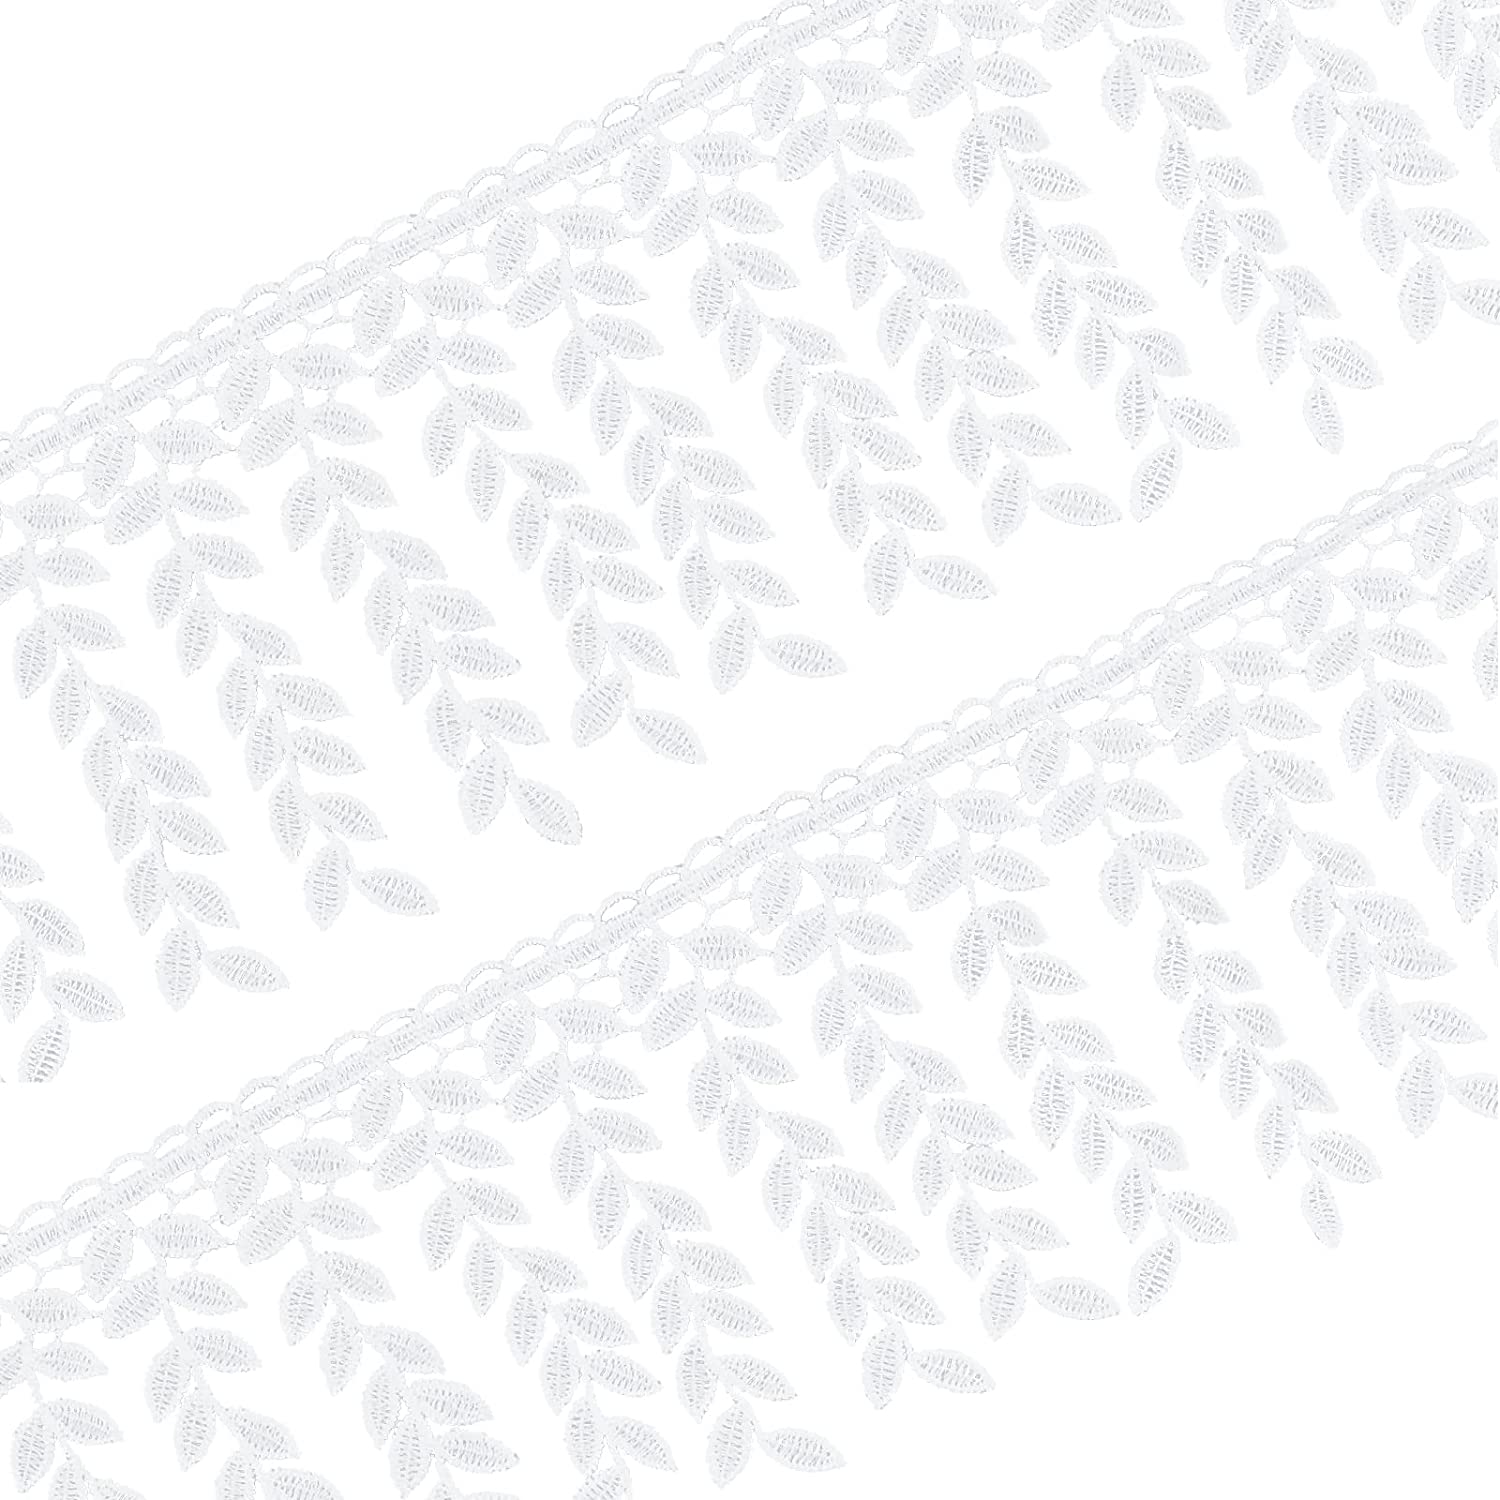 10 Yards of White Lace Trim/ 10 Yards of White Lace Ribbon, Approx